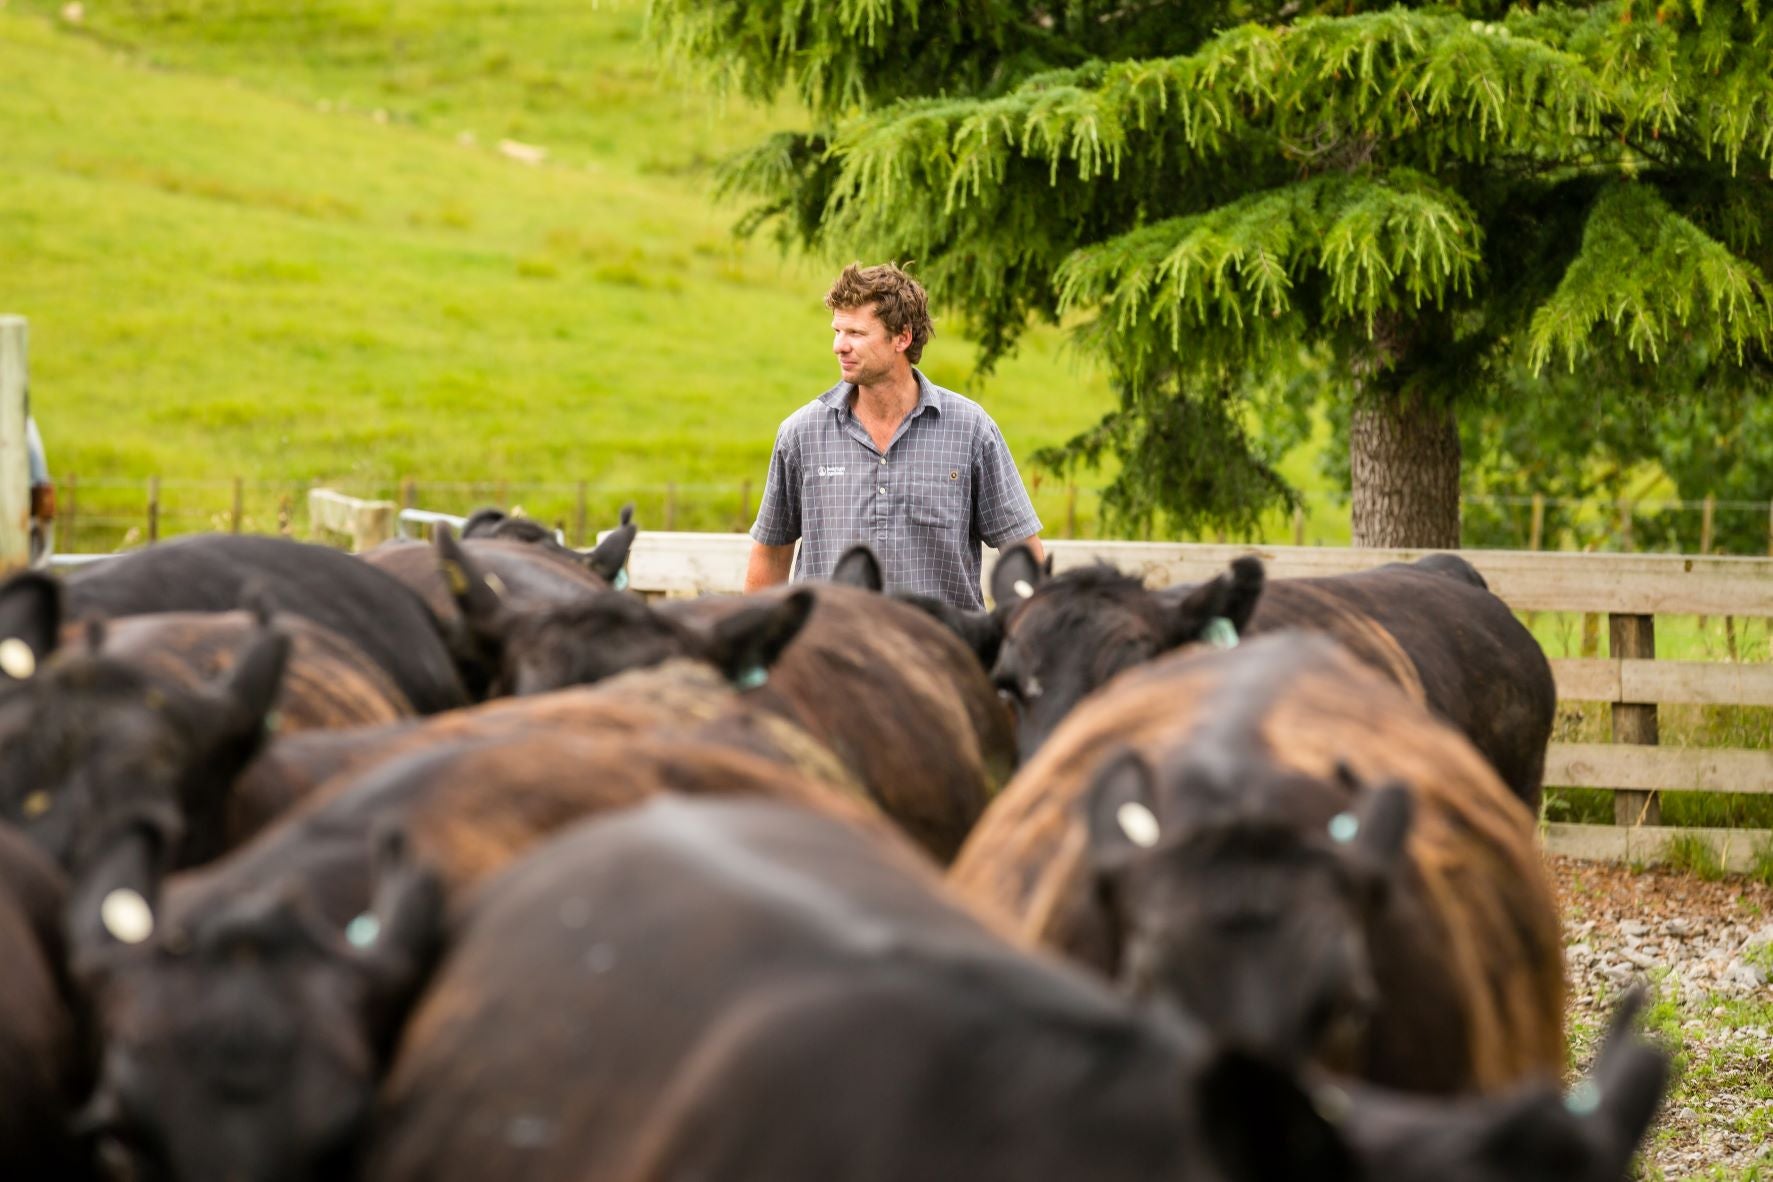 The Feed | Slow farmed, low-stress cows make better beef, says boutique cattle station manager